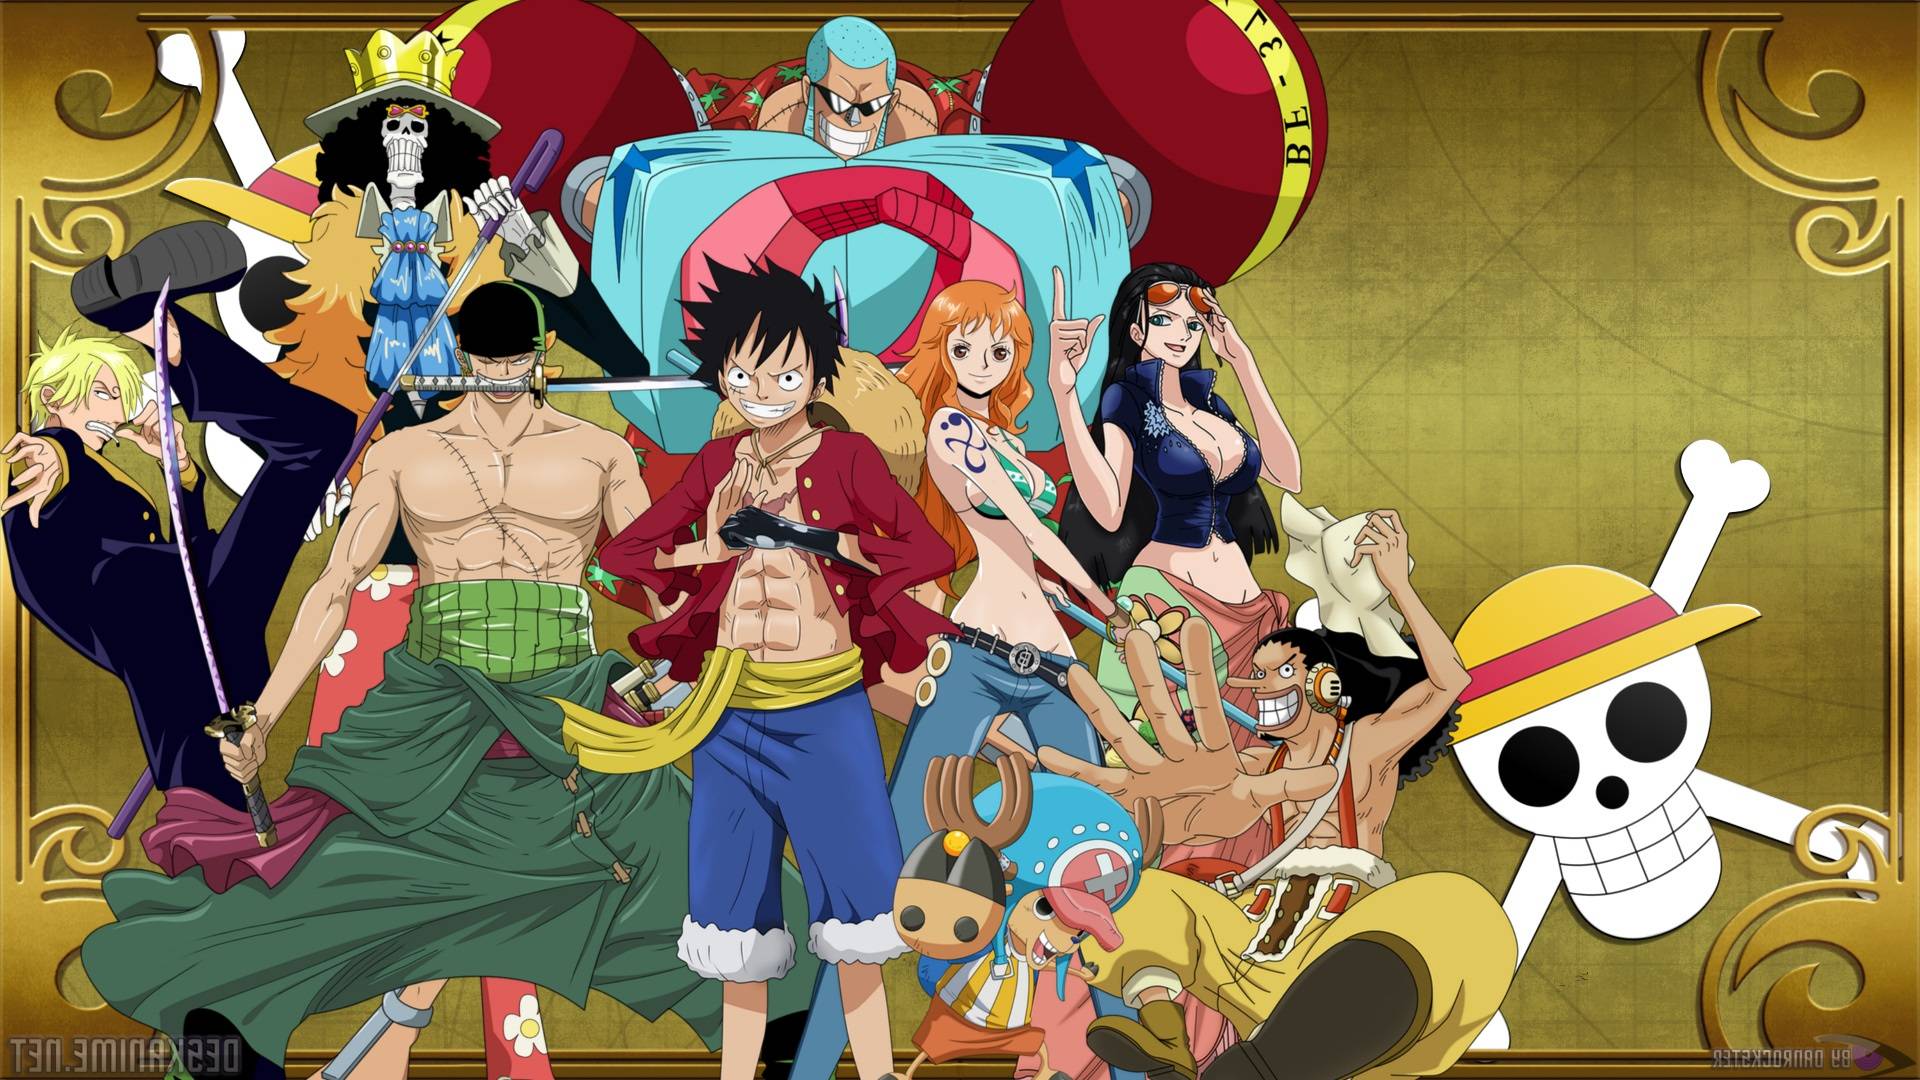 tags one piece one date 14 06 29 resolution 1920x1080 avg dl time 1